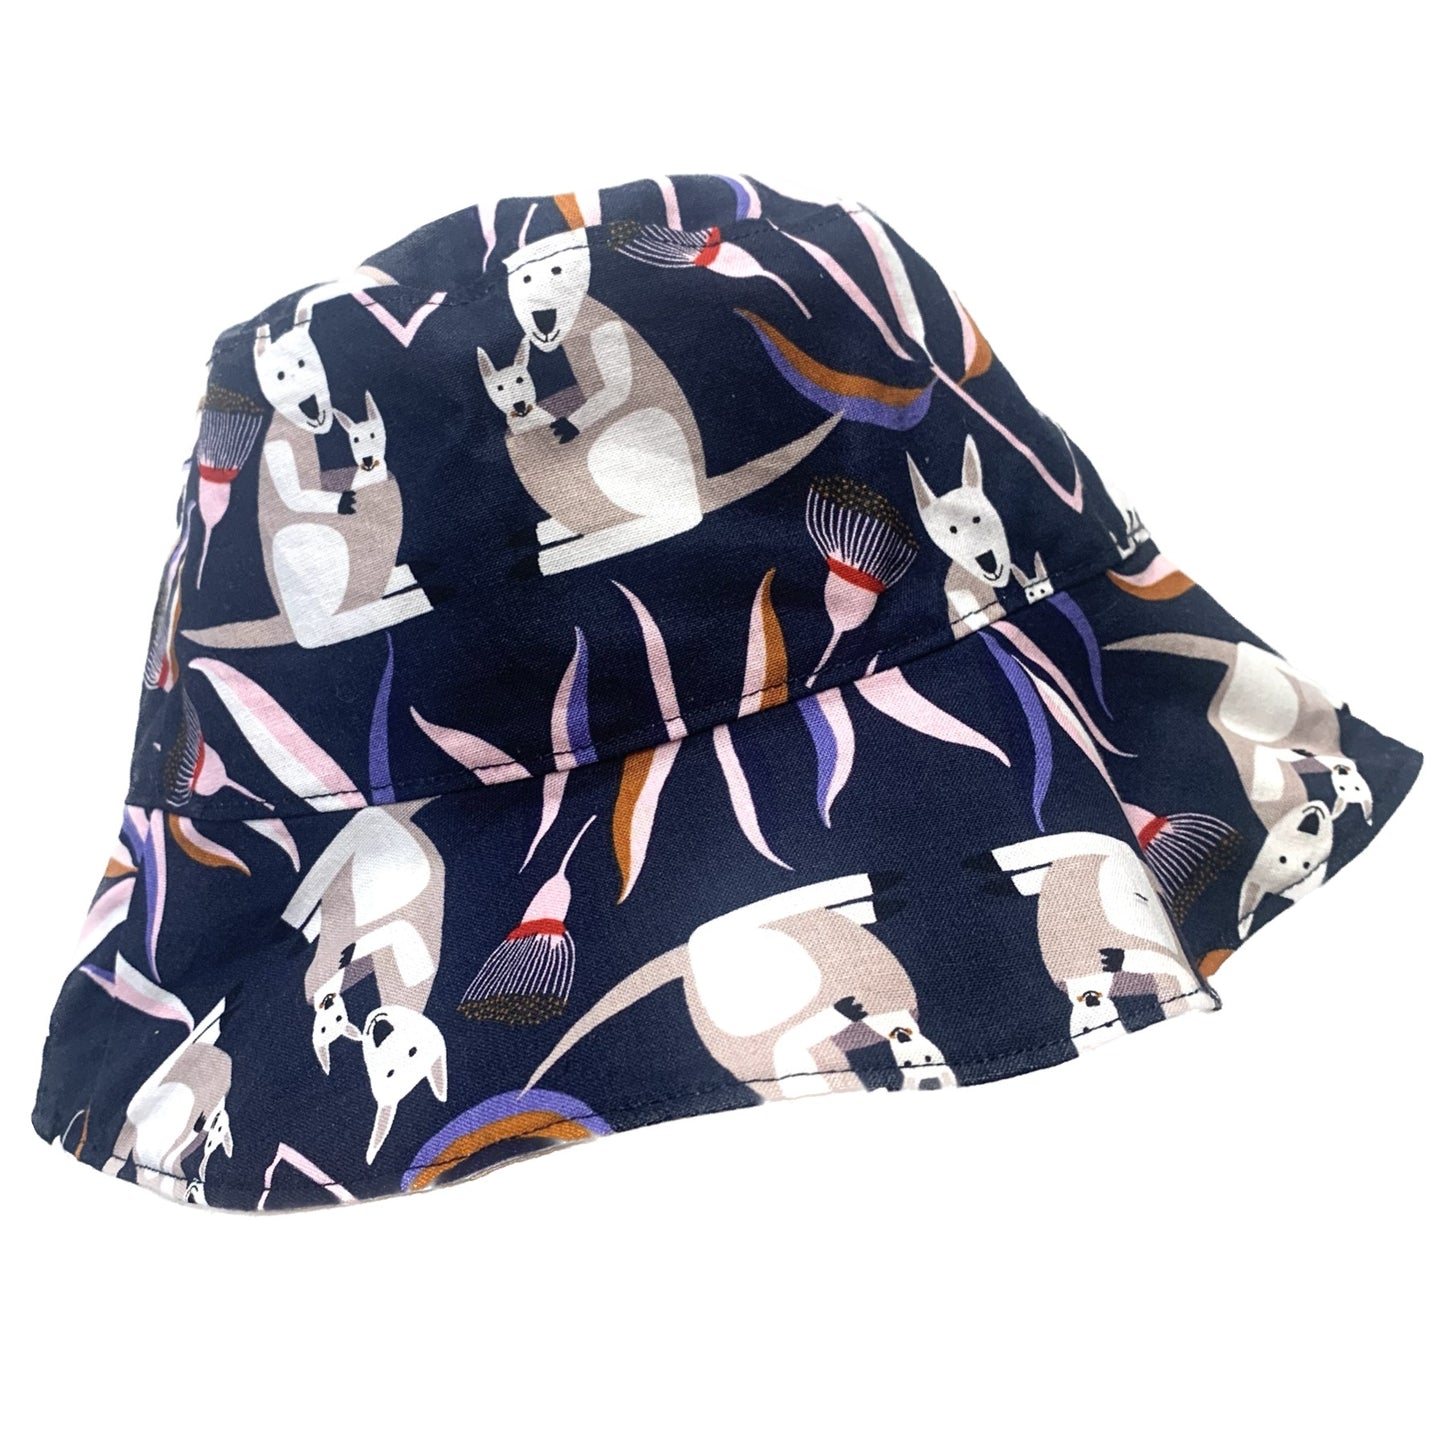 Teacups n Quilts - Navy Kangaroos Fabric Hat- Kids Size Small